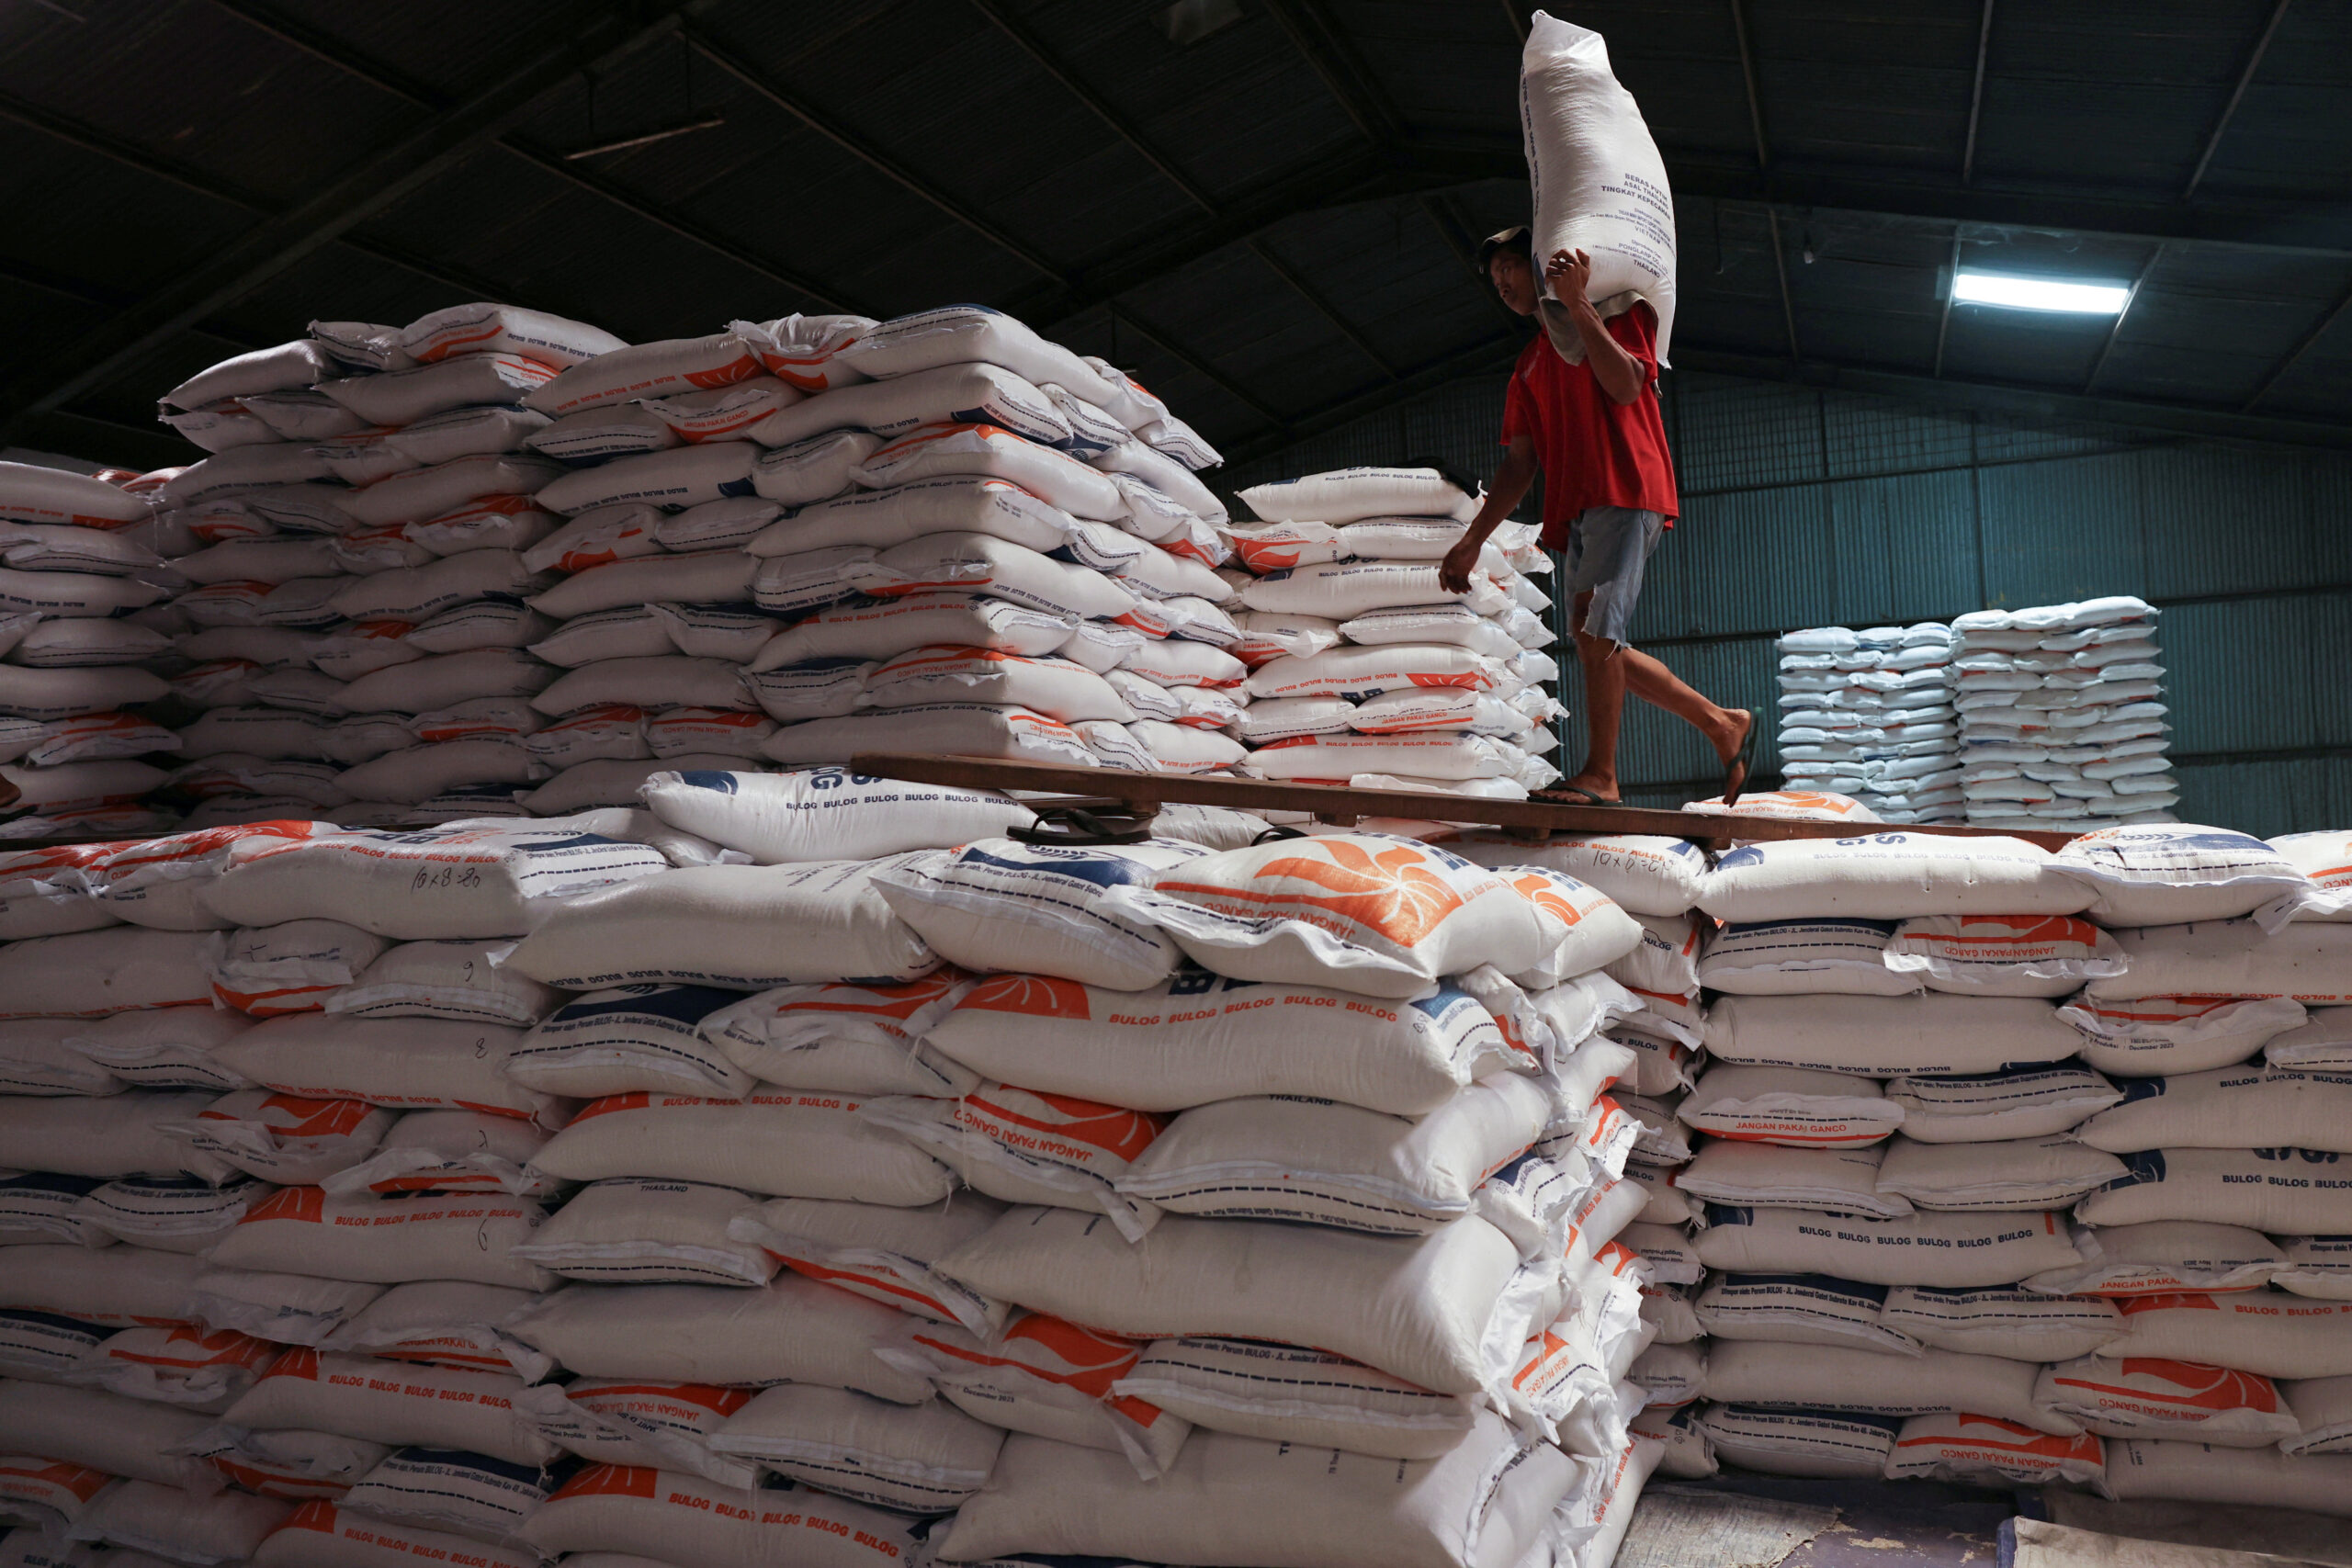 long lines for subsidized rice highlight plight of indonesia’s poor